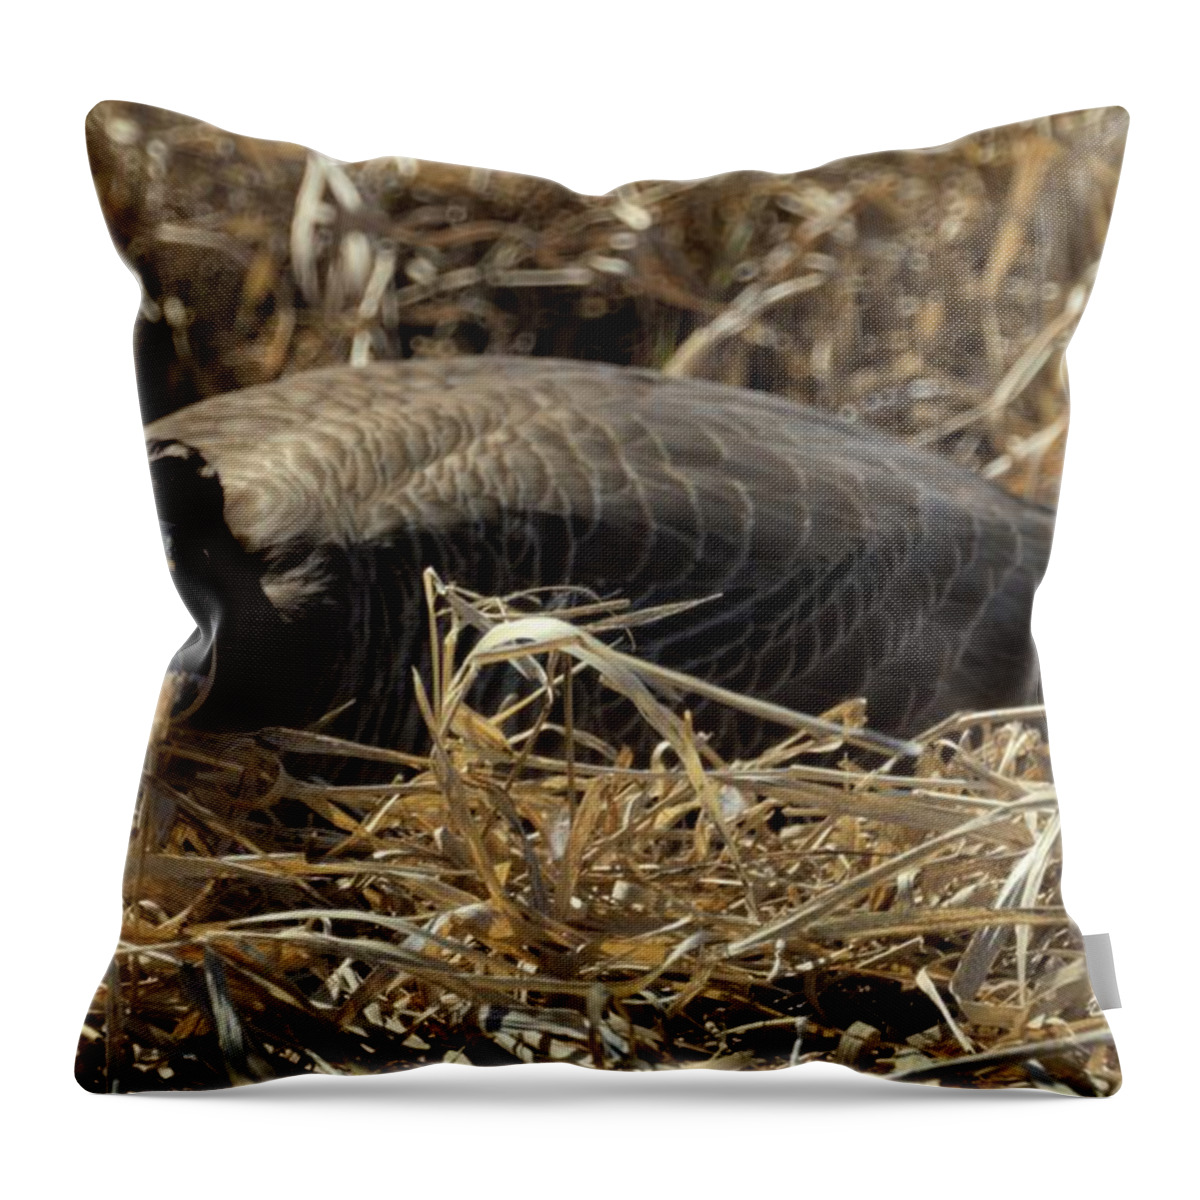 A Goose Sitting On Her Clutch Of Eggs. Throw Pillow featuring the photograph Keeping An Open Eye by Bonfire Photography